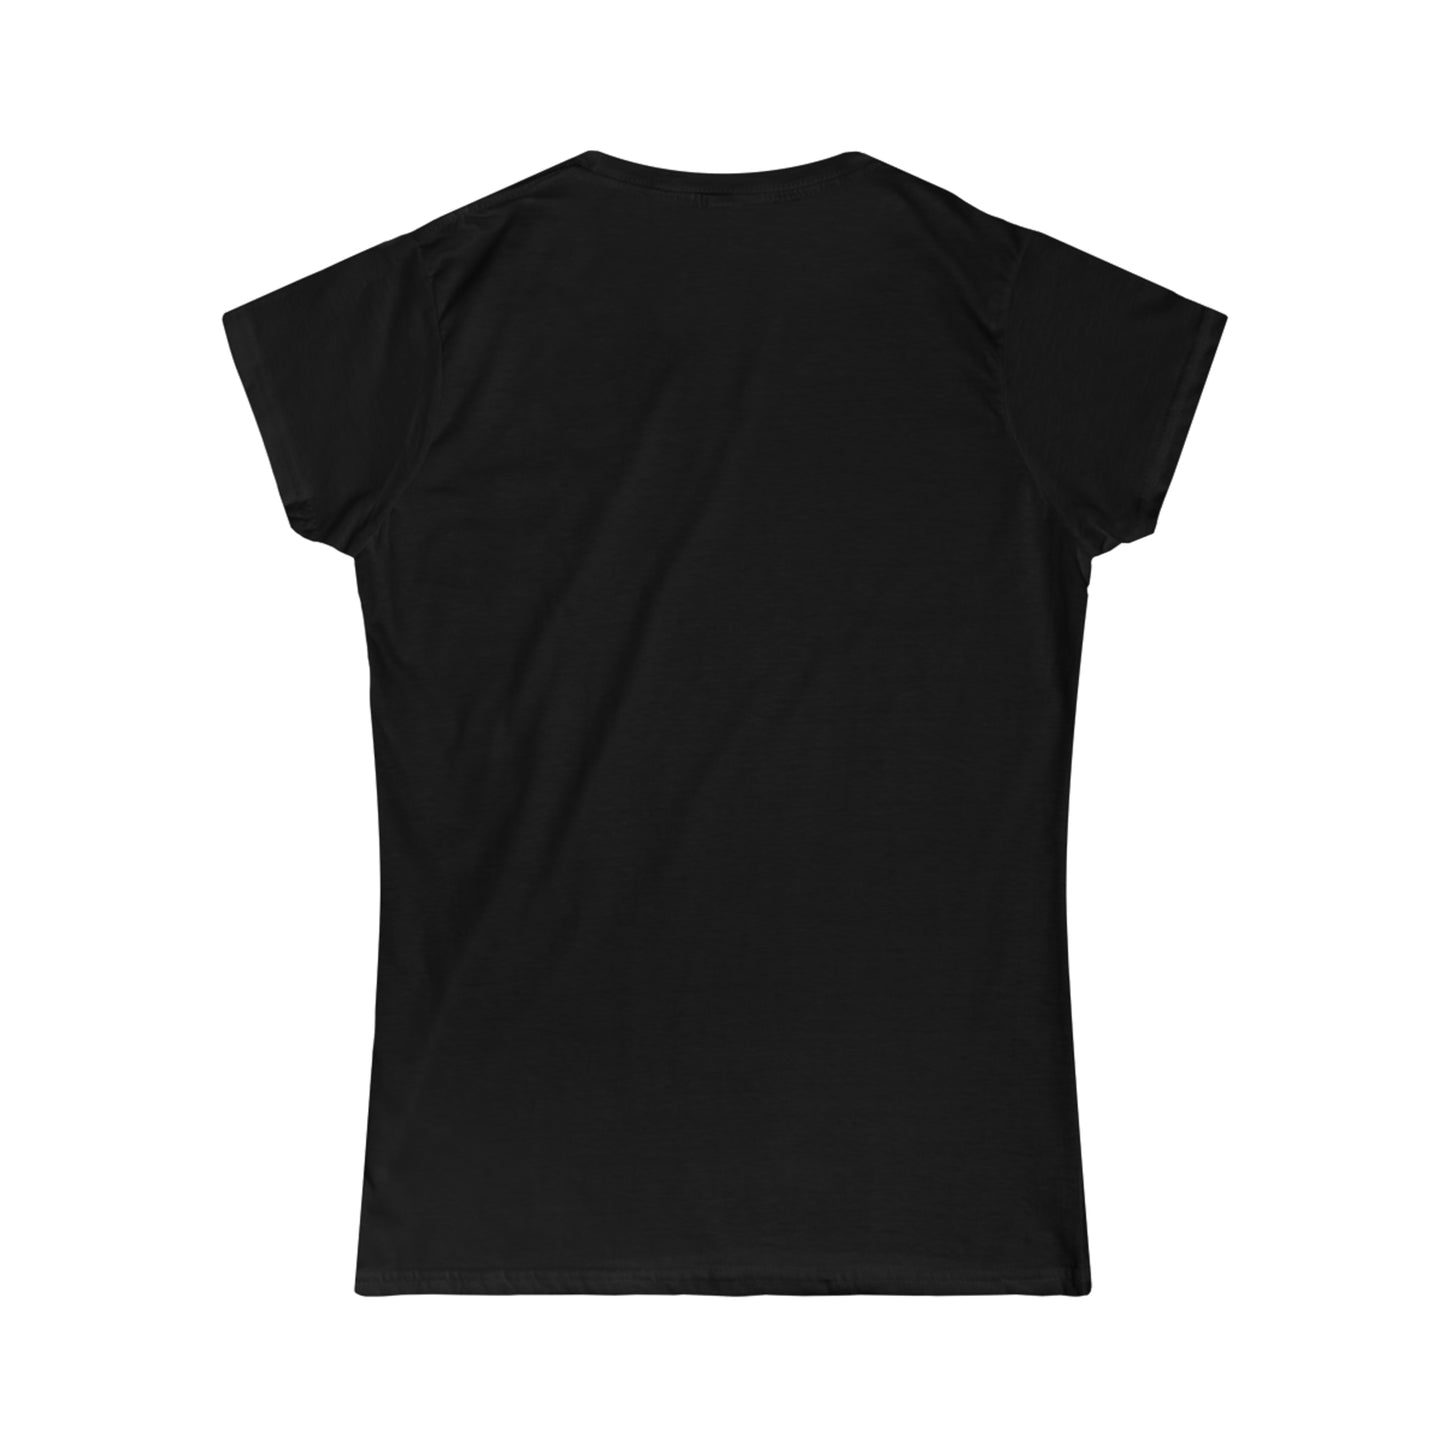 Keeping It Real - Women's Softstyle Tee